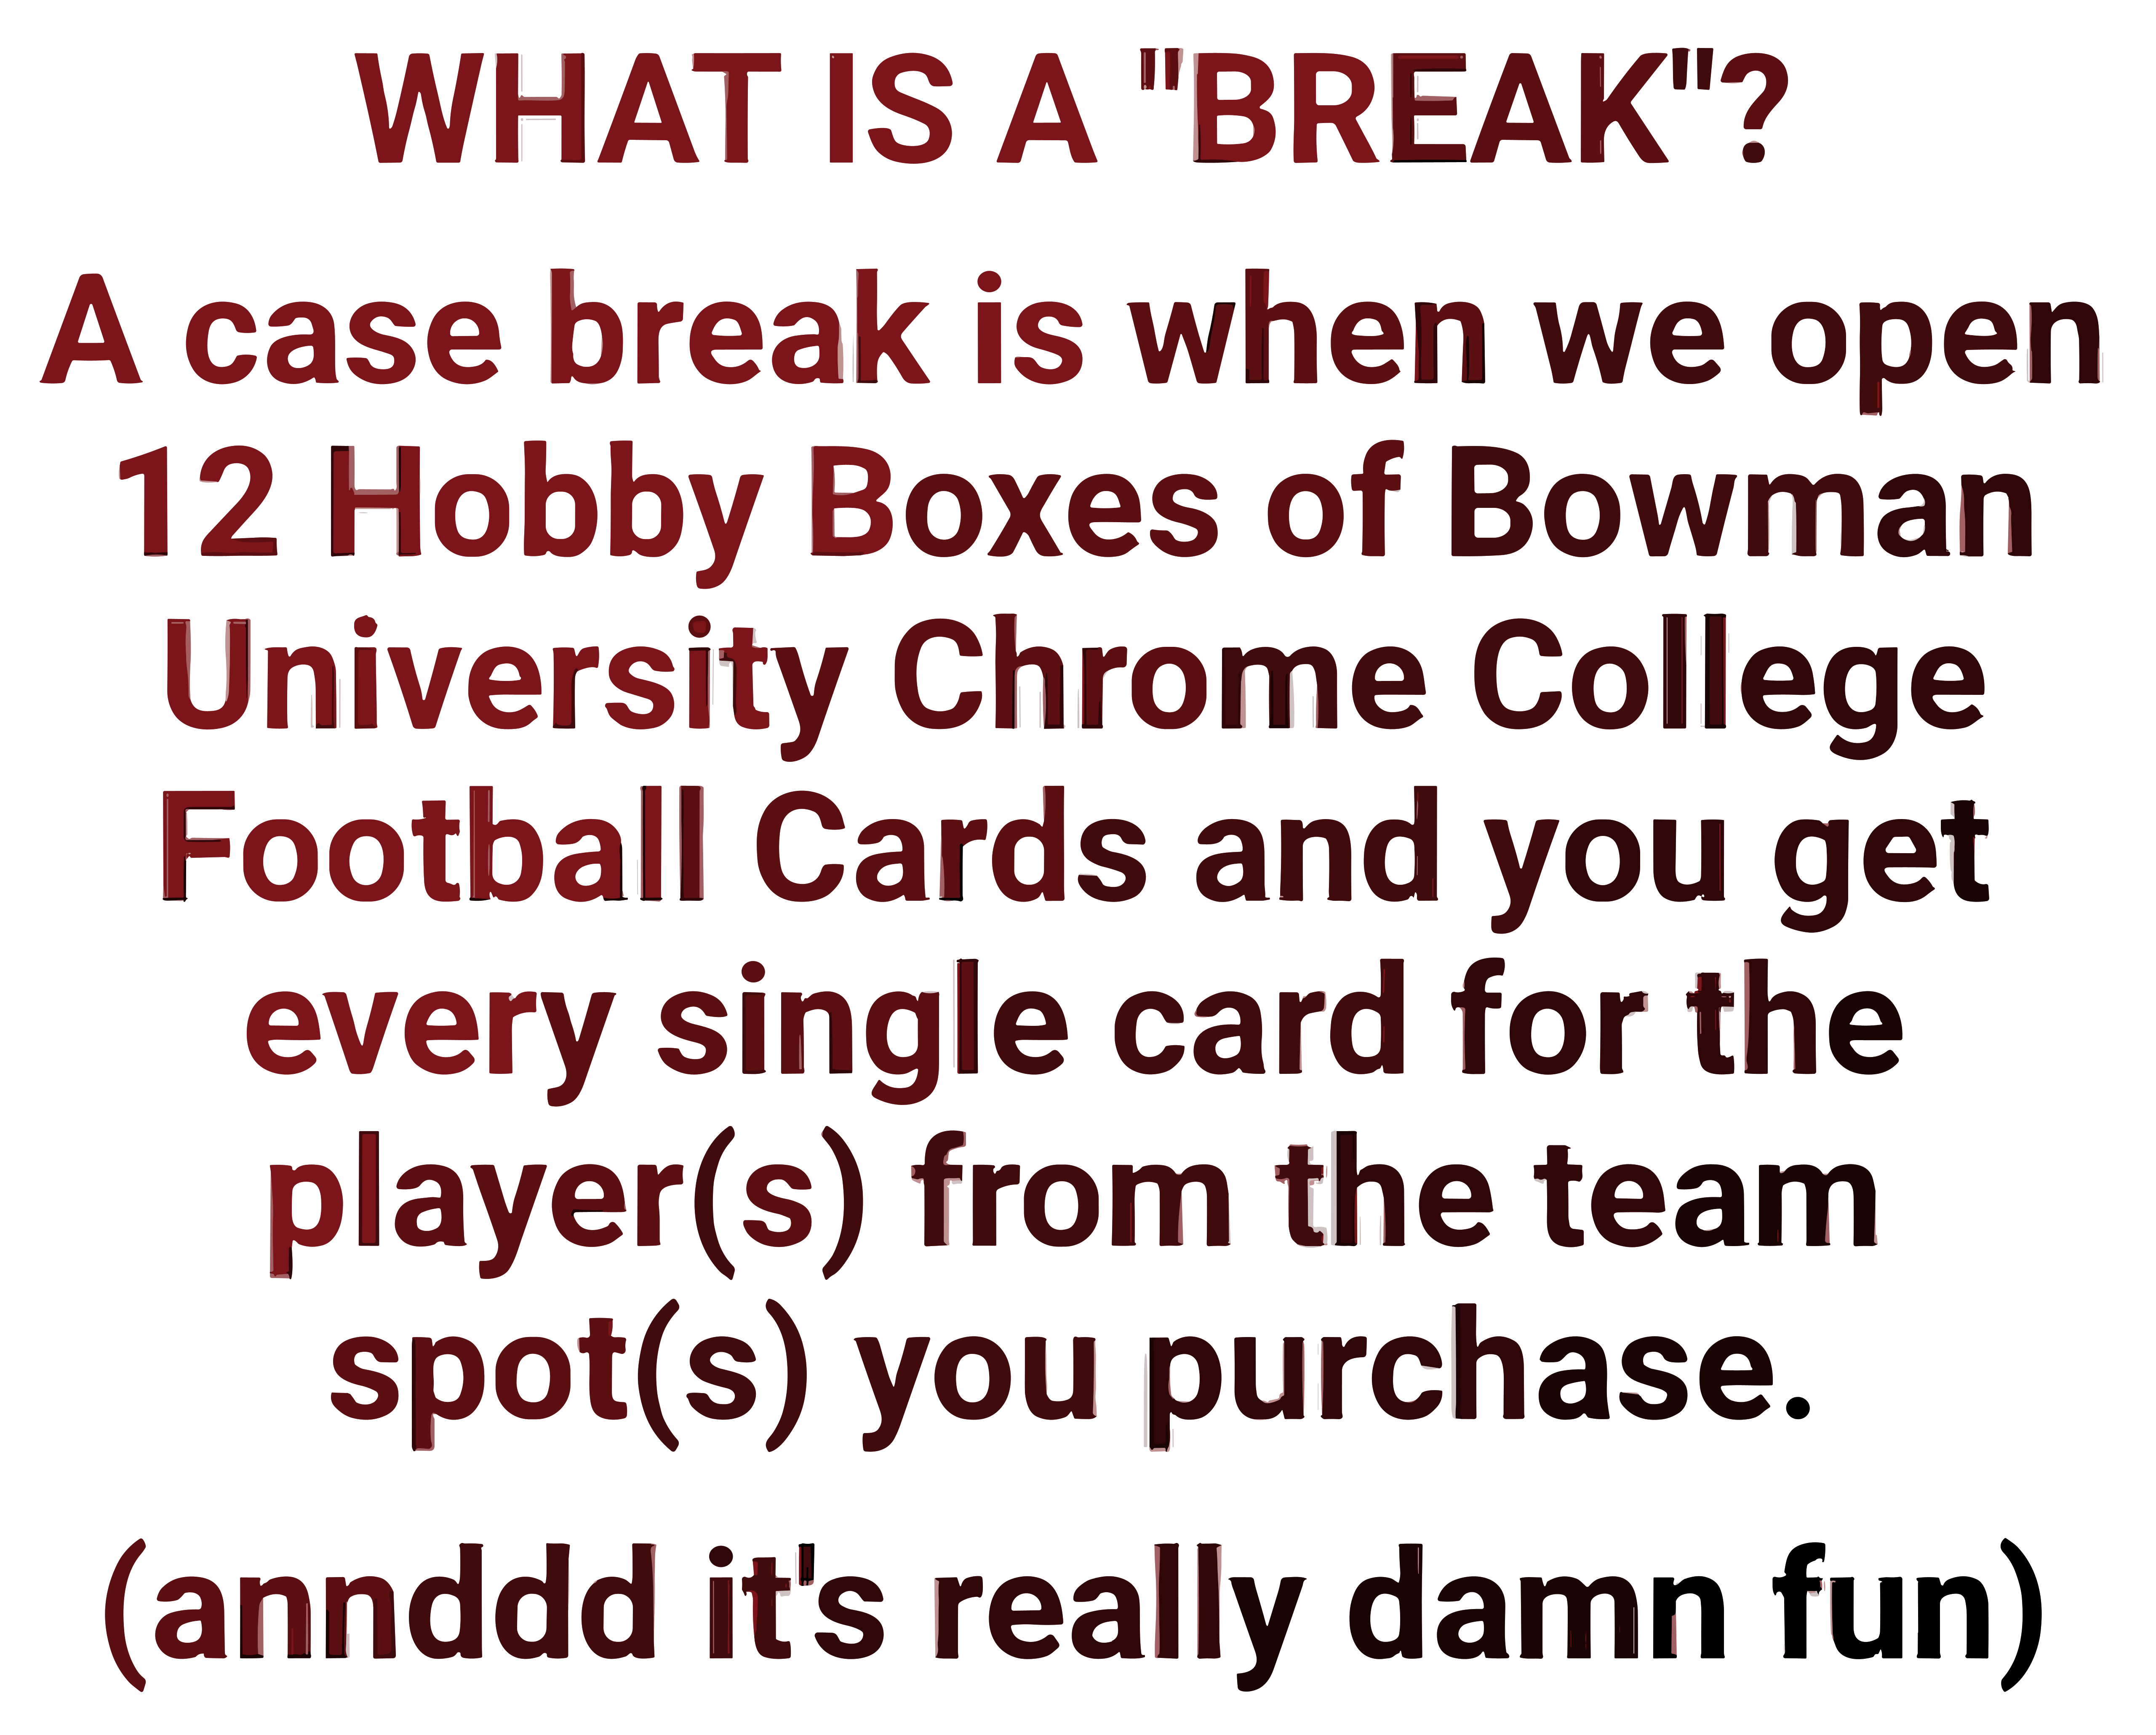 A case break is when we open 12 Hobby Boxes of 2023 2022 2021 OR SAPPHIRE Bowman University U Chrome College Football Cards and you get every single card for the player(s) from the team spot(s) you purchase.
